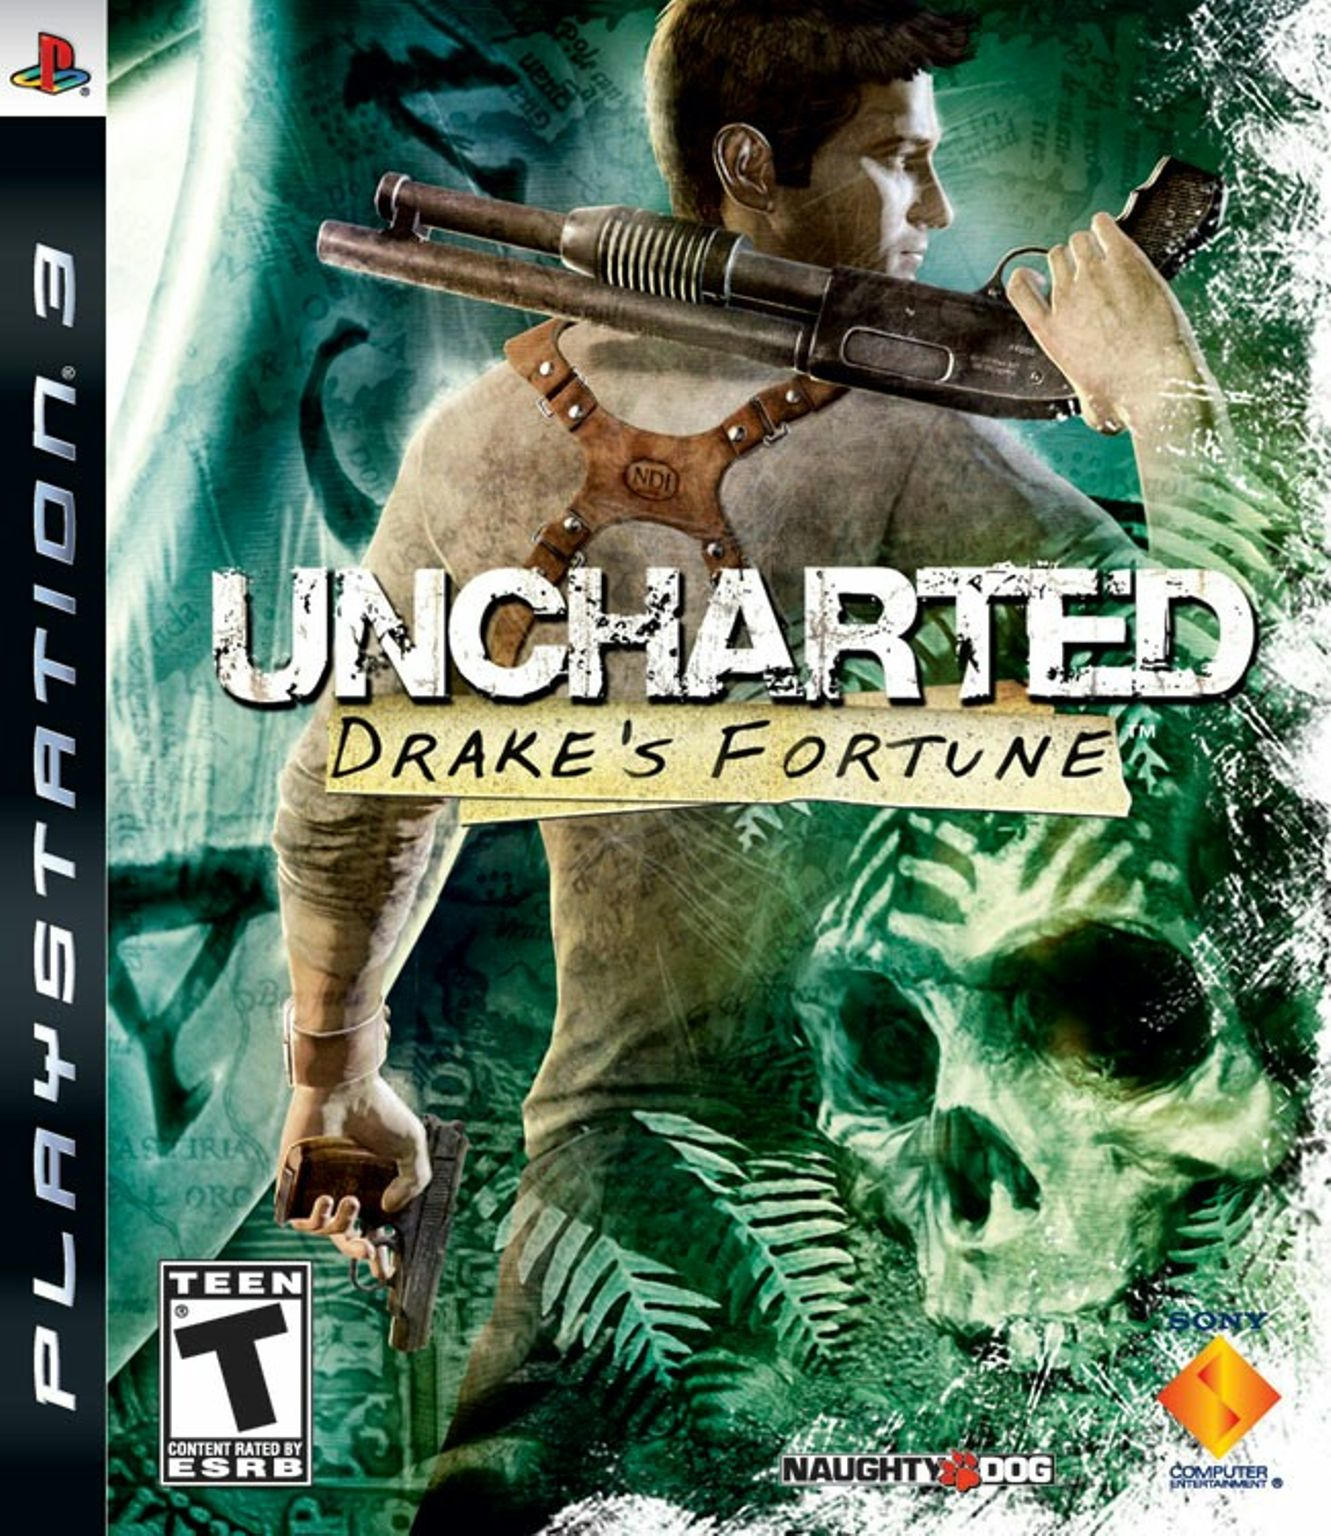 uncharted 1 remastered ps4